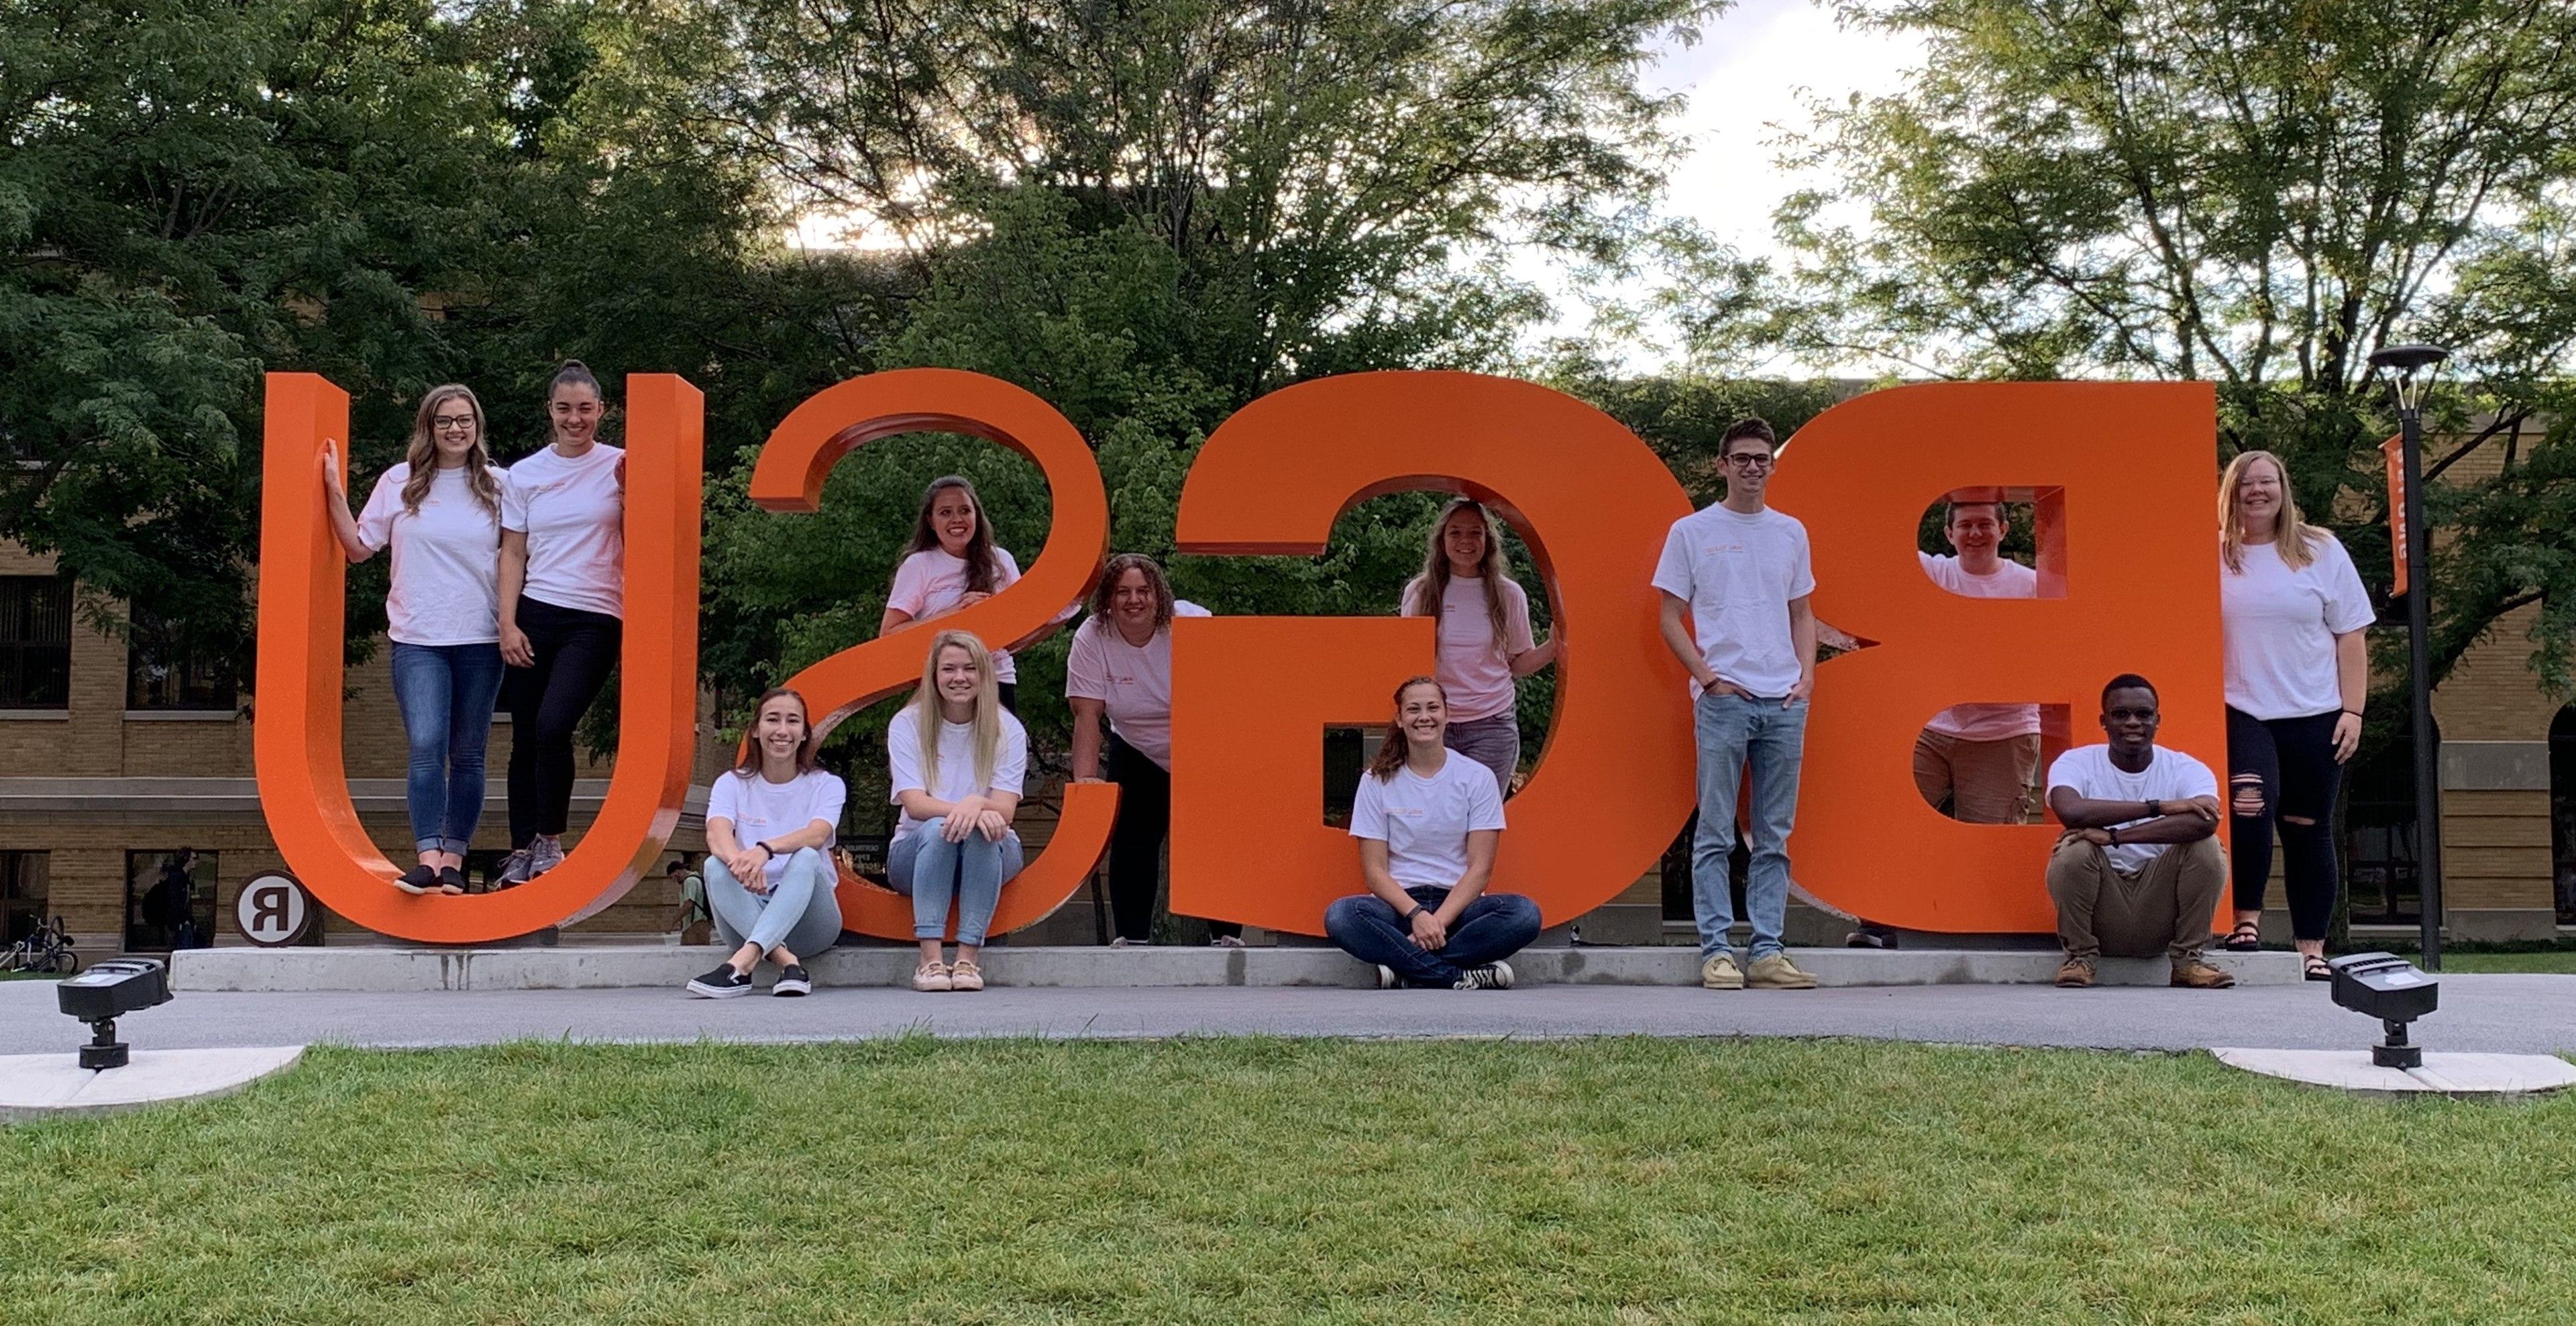 Fall 2019 Research Assistants for the Police Integrity Research Group posing at the BGSU letters.